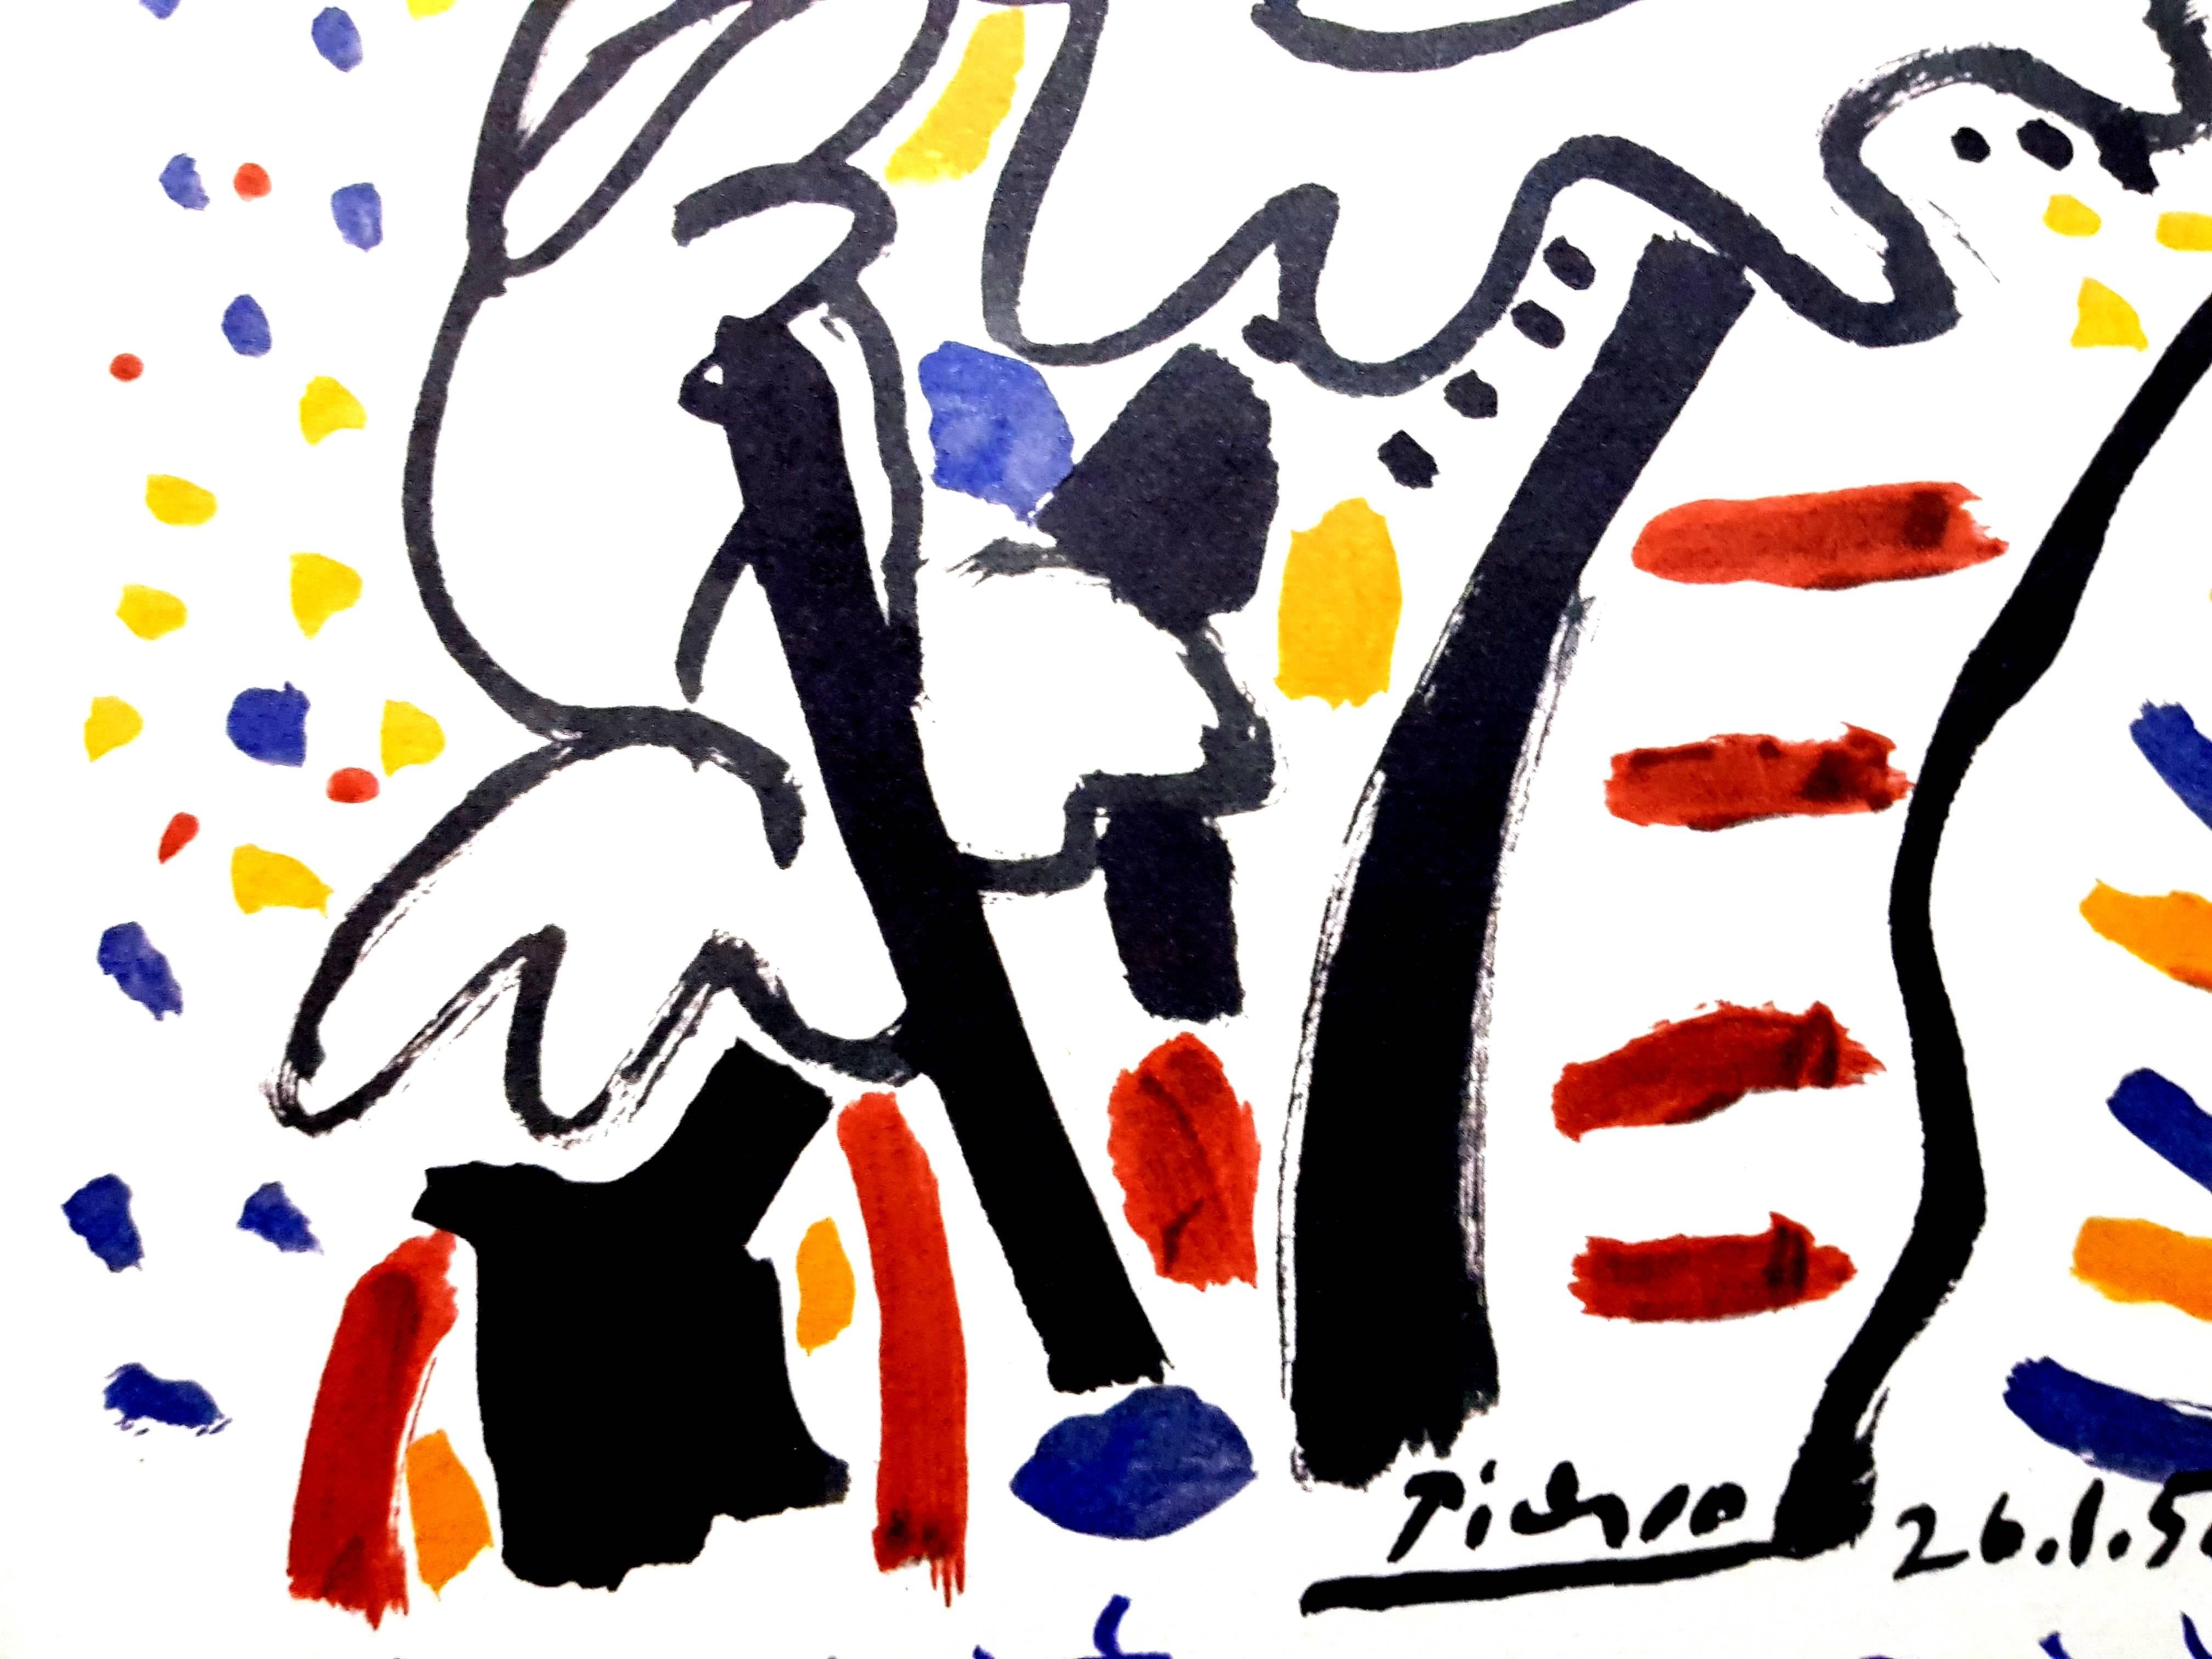 After Pablo Picasso - Carnaval - Lithograph 1